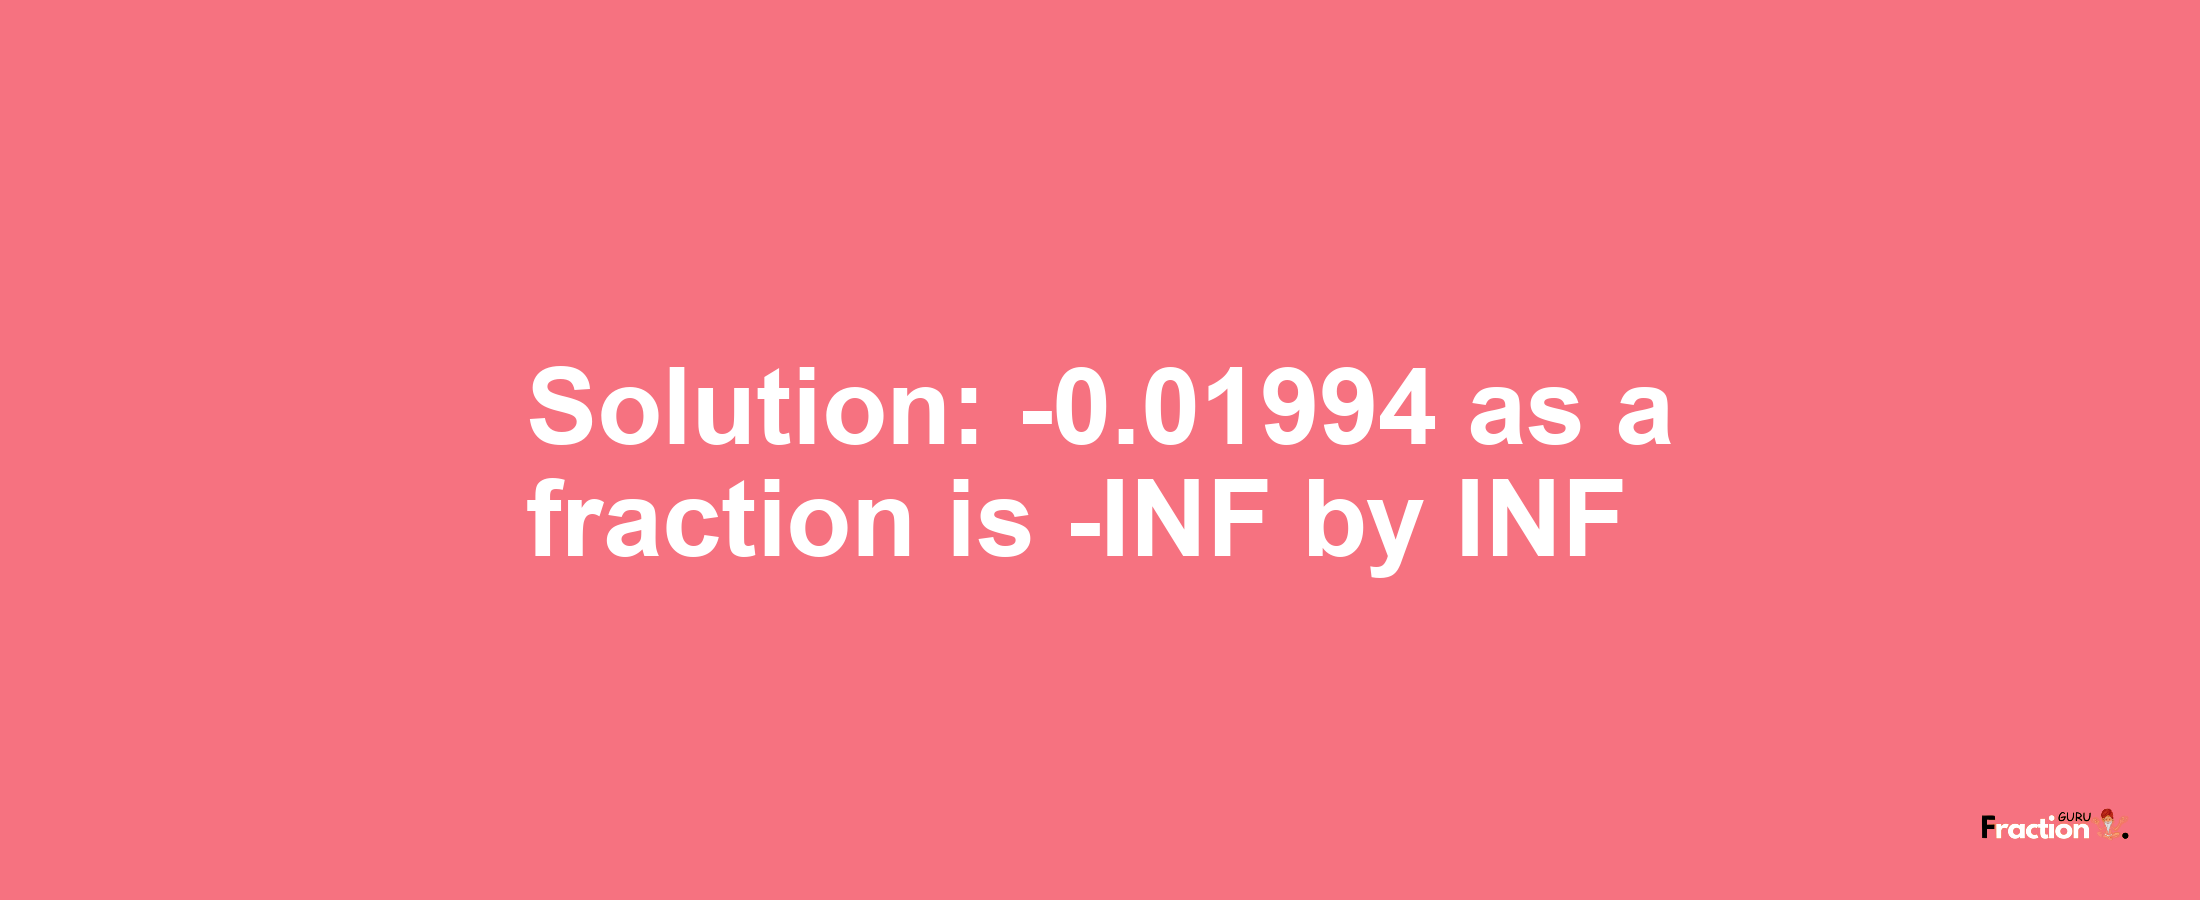 Solution:-0.01994 as a fraction is -INF/INF